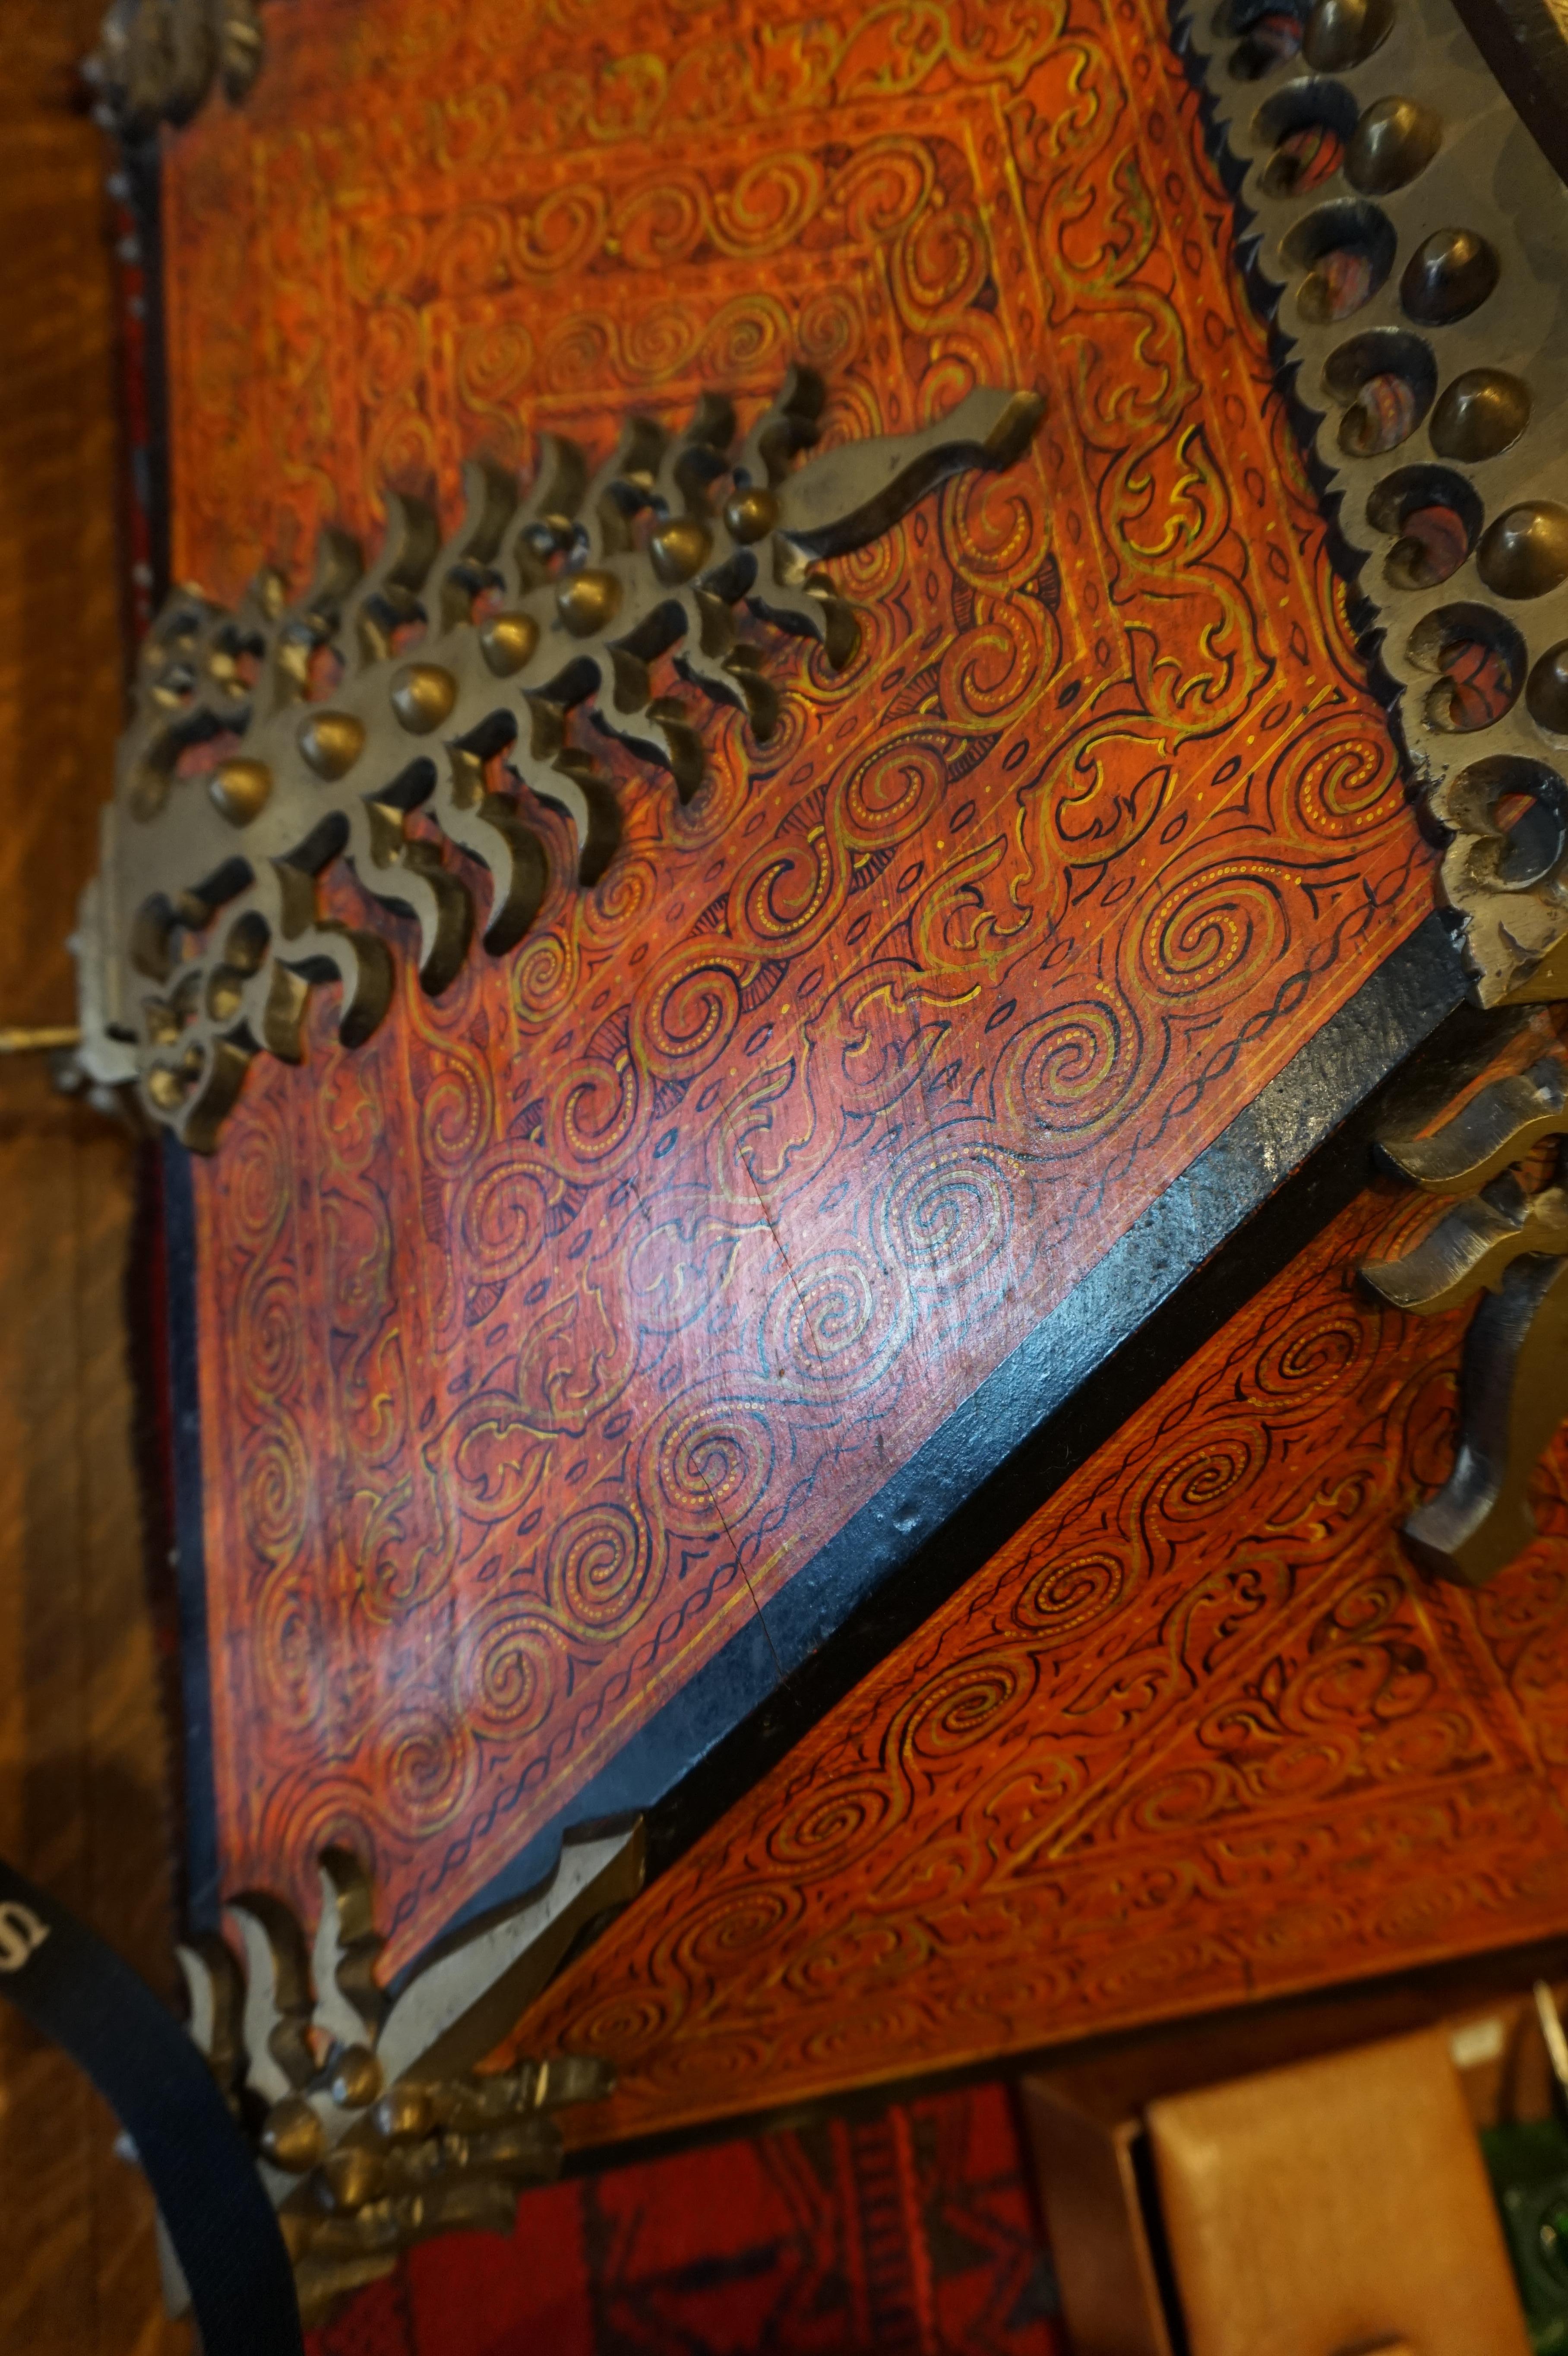 Rare Malabar document safe chest from 1870s from Ceylon.
Hand painted safe chest used during the spice trade to store valuables and important documents. This chest has the surviving key and custom forged brass hardware. It has been hand painted in